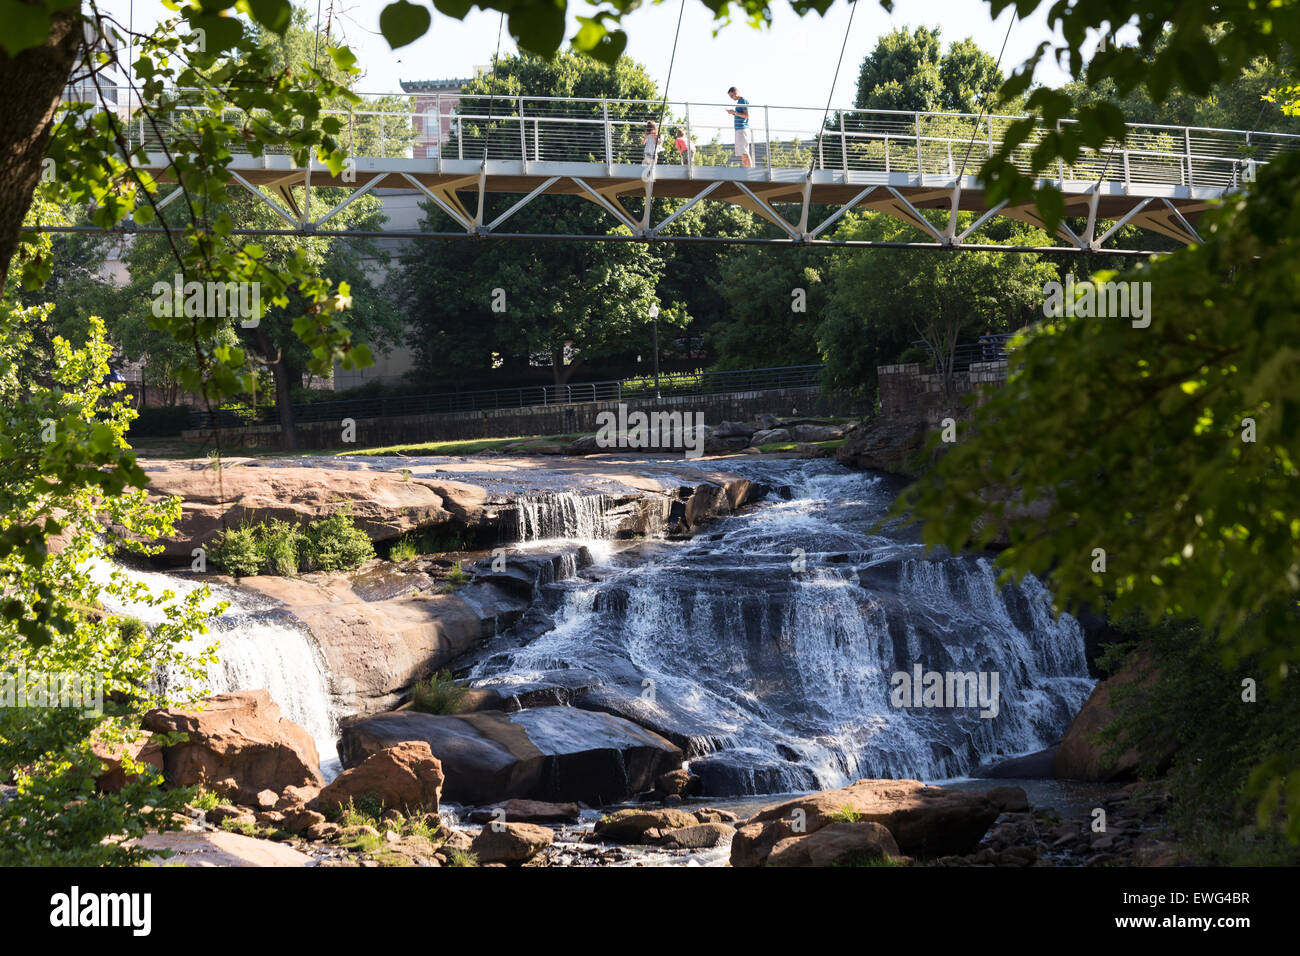 The Liberty bridge, a curved suspension bridge, crosses the Reedy River falls in beautiful and exciting downtown Greenville, SC. Stock Photo